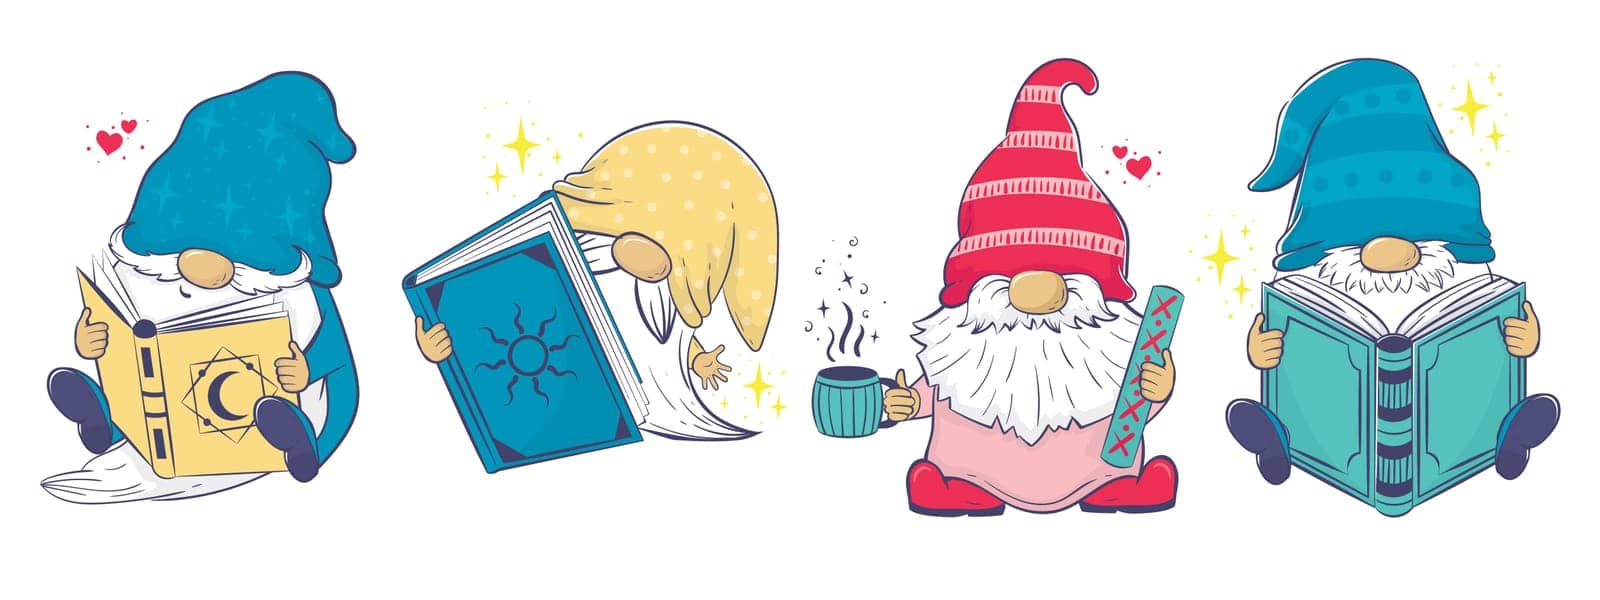 Clipart collection with Cute cartoon gnomes with books. by Zoya_Zozulya